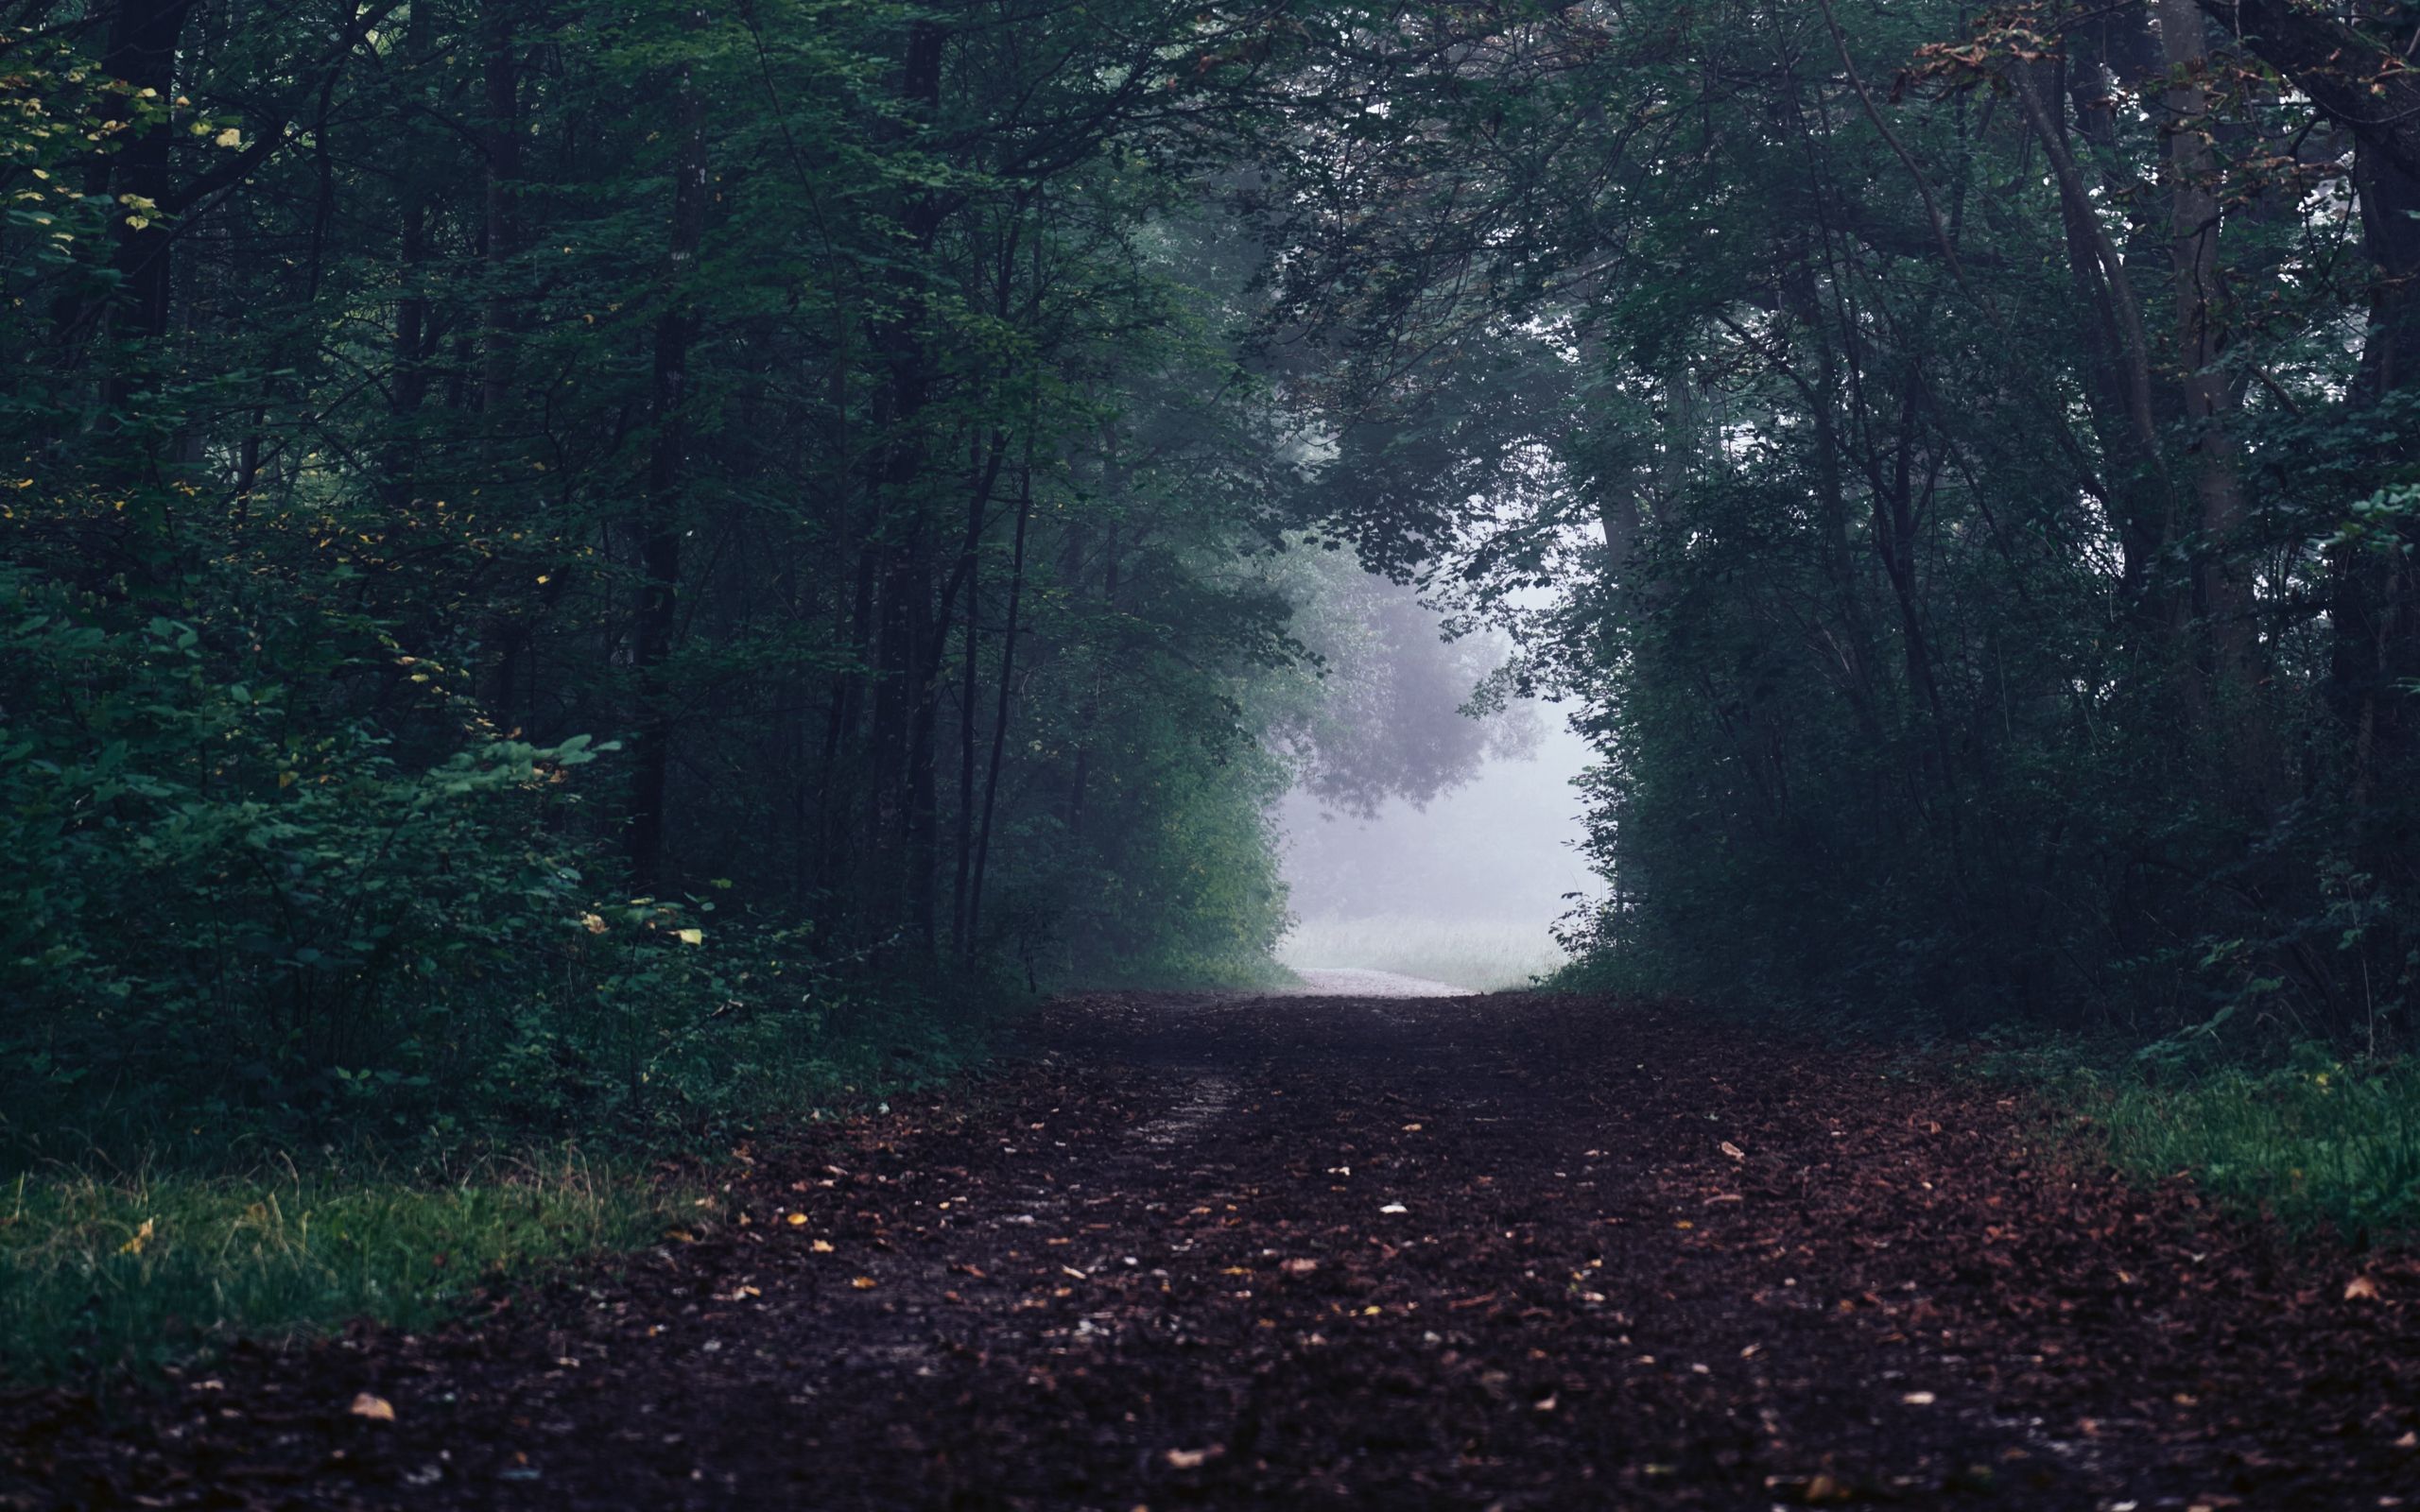 Download wallpaper 2560x1600 forest, path, fog, trees, gloomy